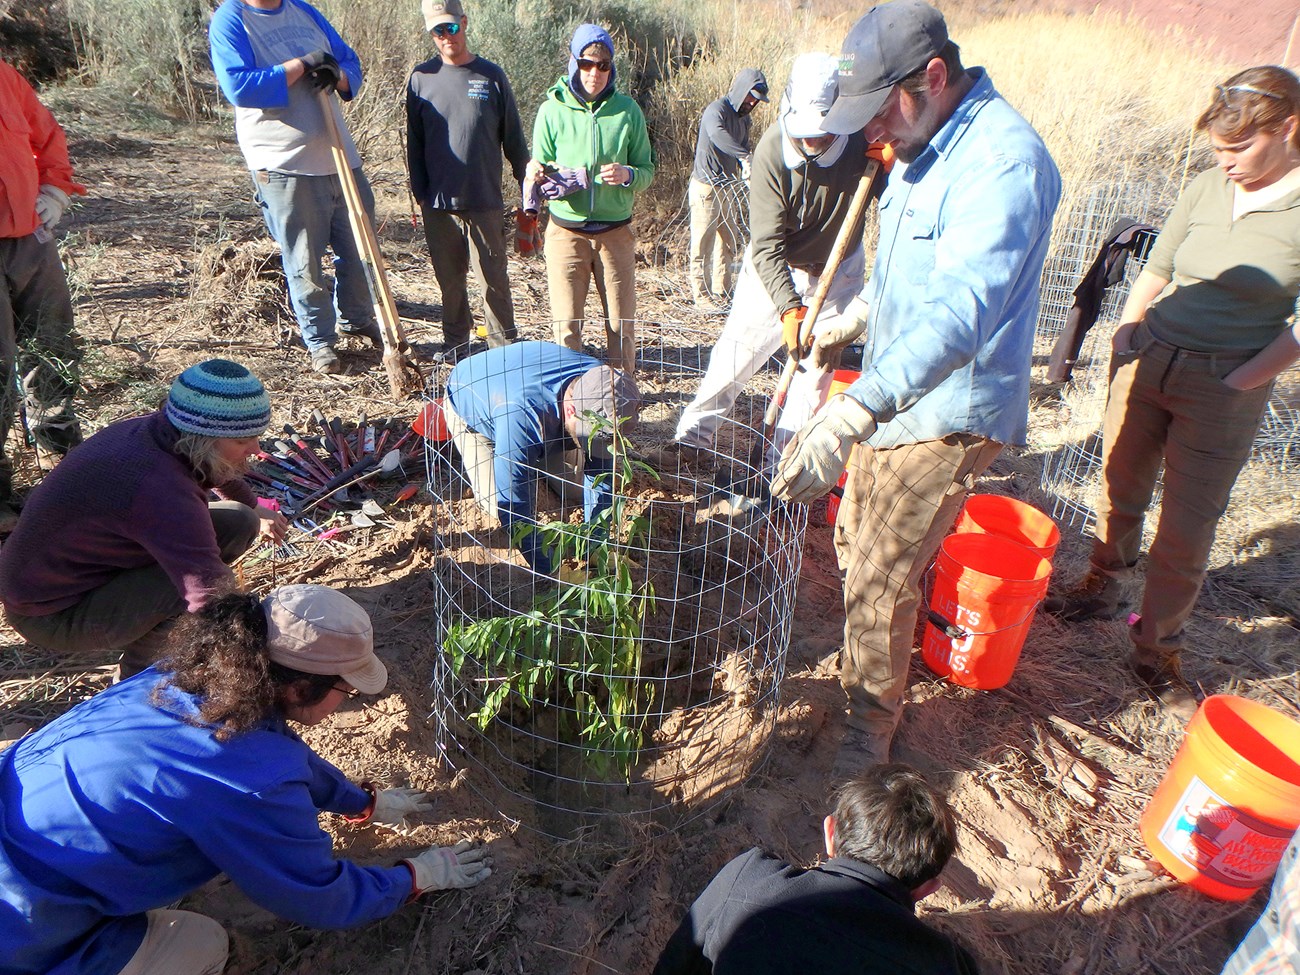 A group of men and women stand observing while some of them plant a tree and surround it with a wire cage.